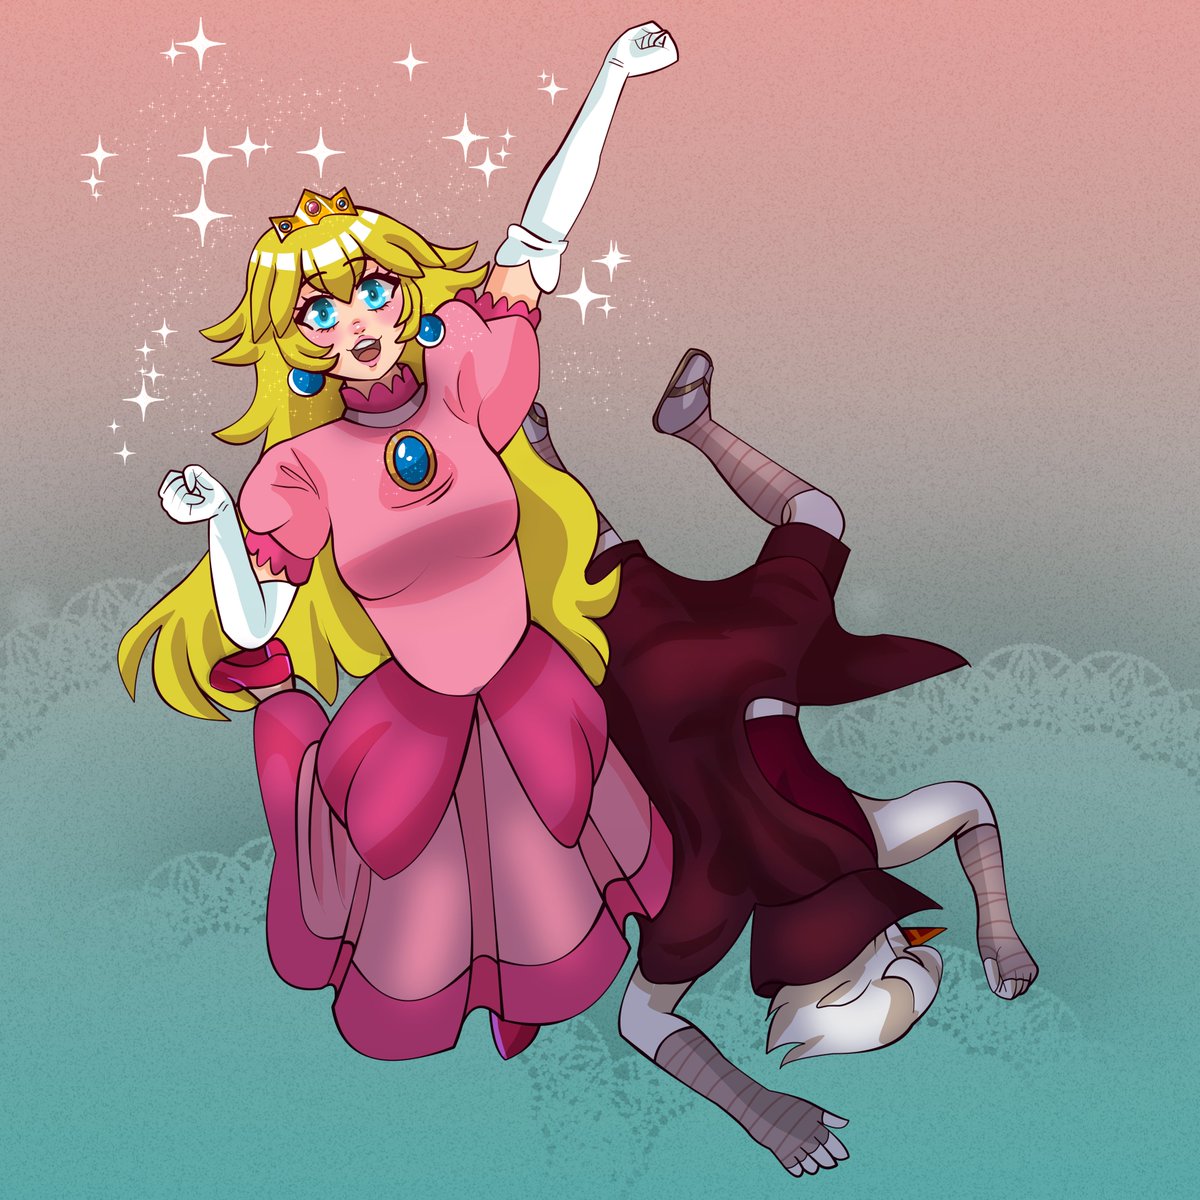 Welp Peach won my poll who would win in a fight between dirk and peach. These two drawings were a riot to do XD
Thanks again to visguard and lovebunny for inspiring these
#Homestuck #HOM3StUCK #SuperMario #PrincessPeach #dirkstrider #fanart #mario